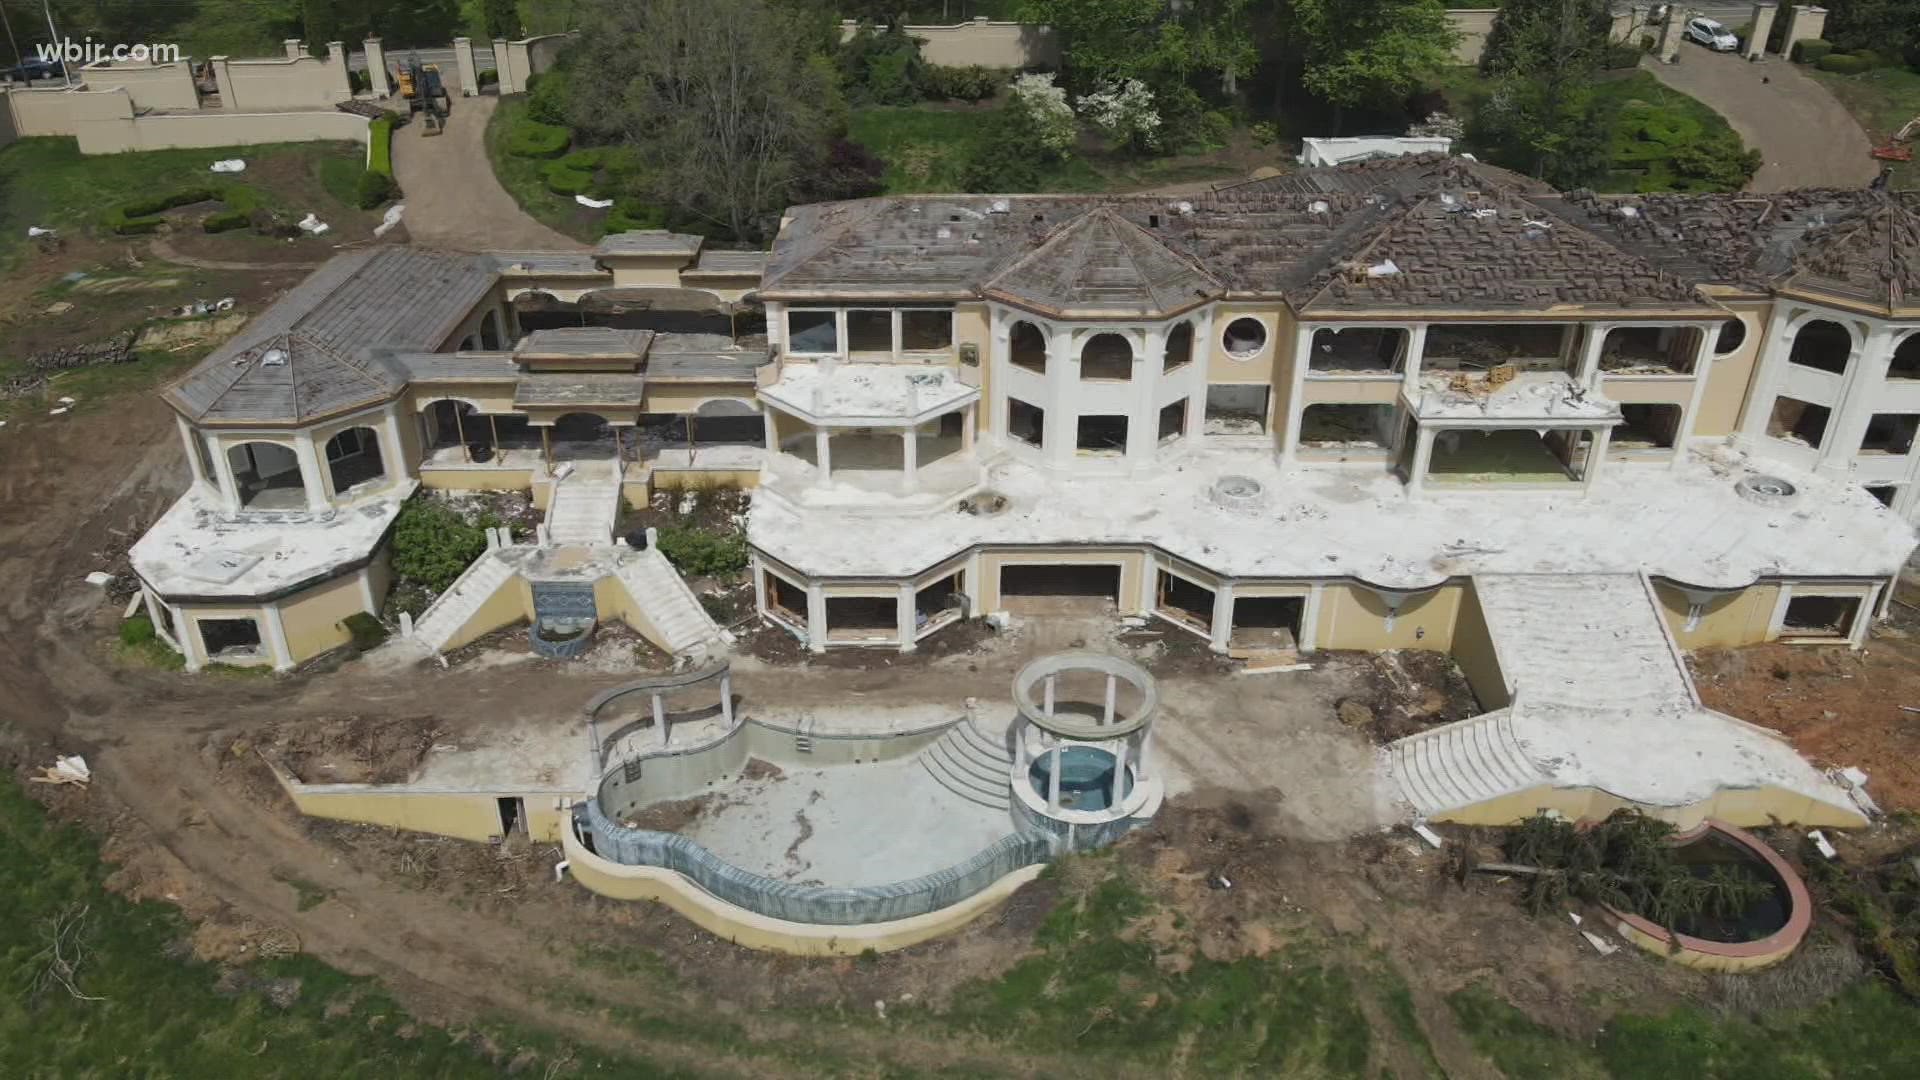 Crews are demolishing one of Tennessee's largest mansions. This drone video shows Villa Collina being torn down in West Knoxville.